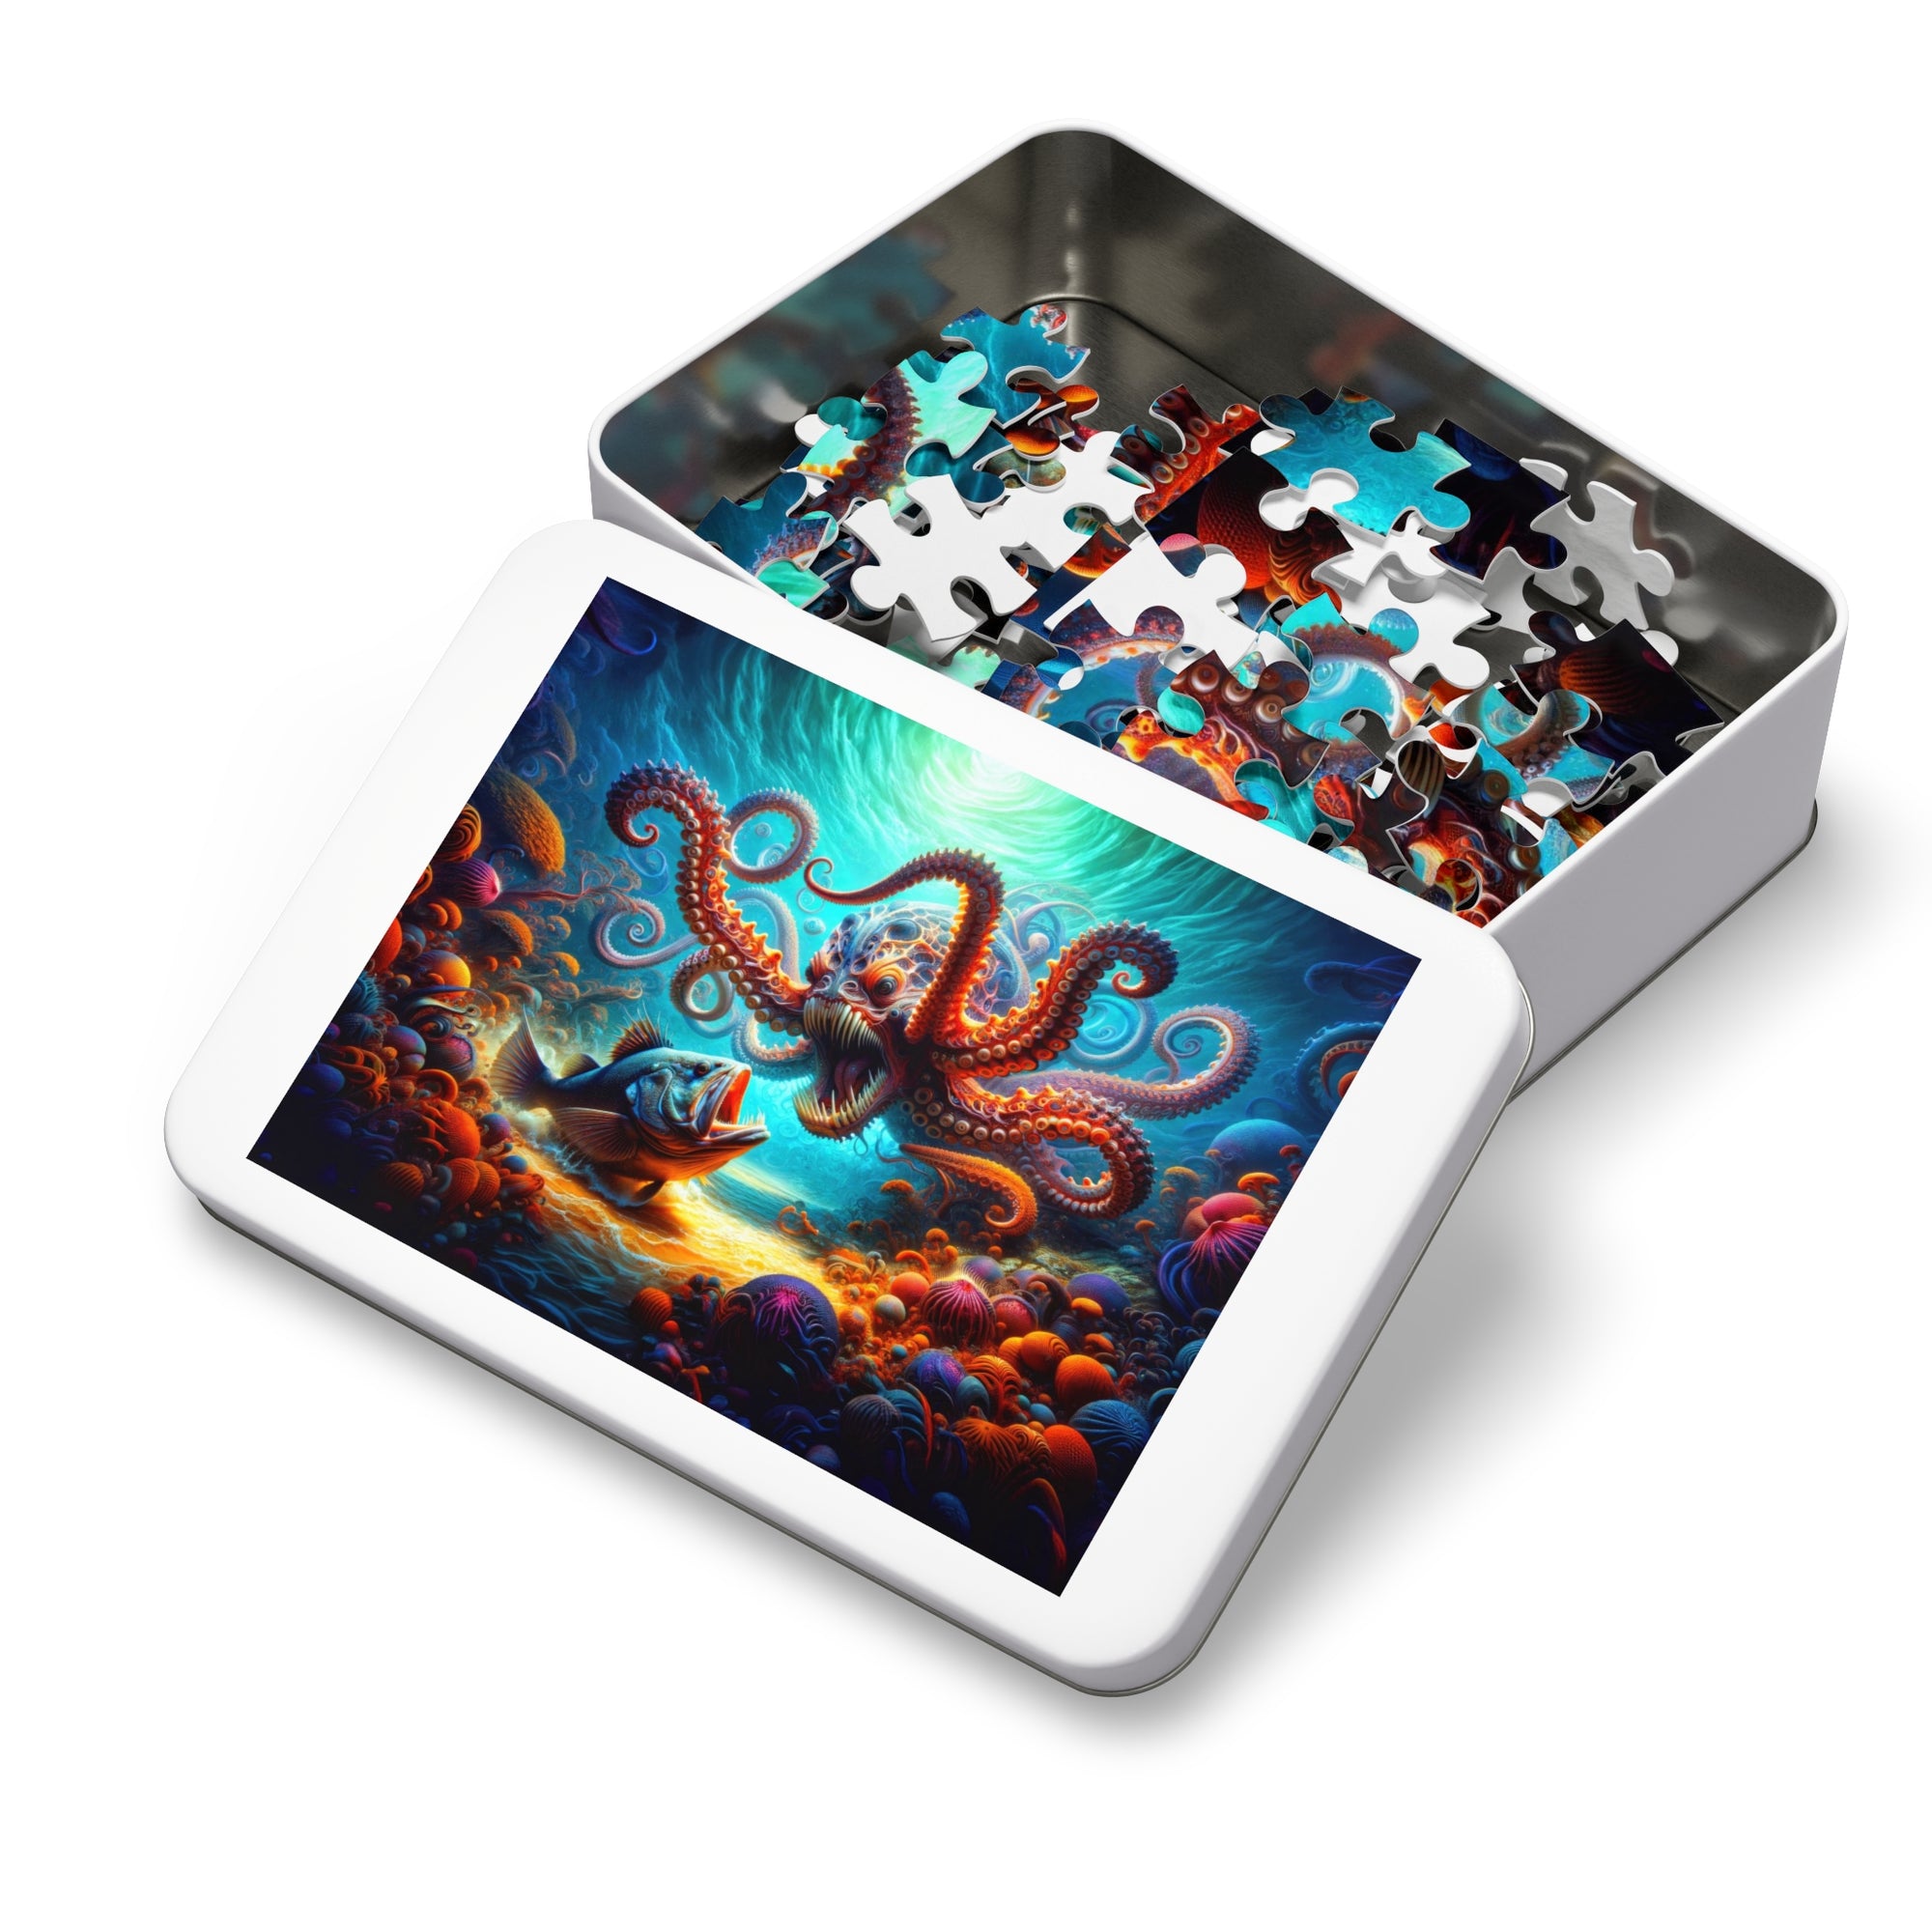 Abyssal Confrontation Jigsaw Puzzle